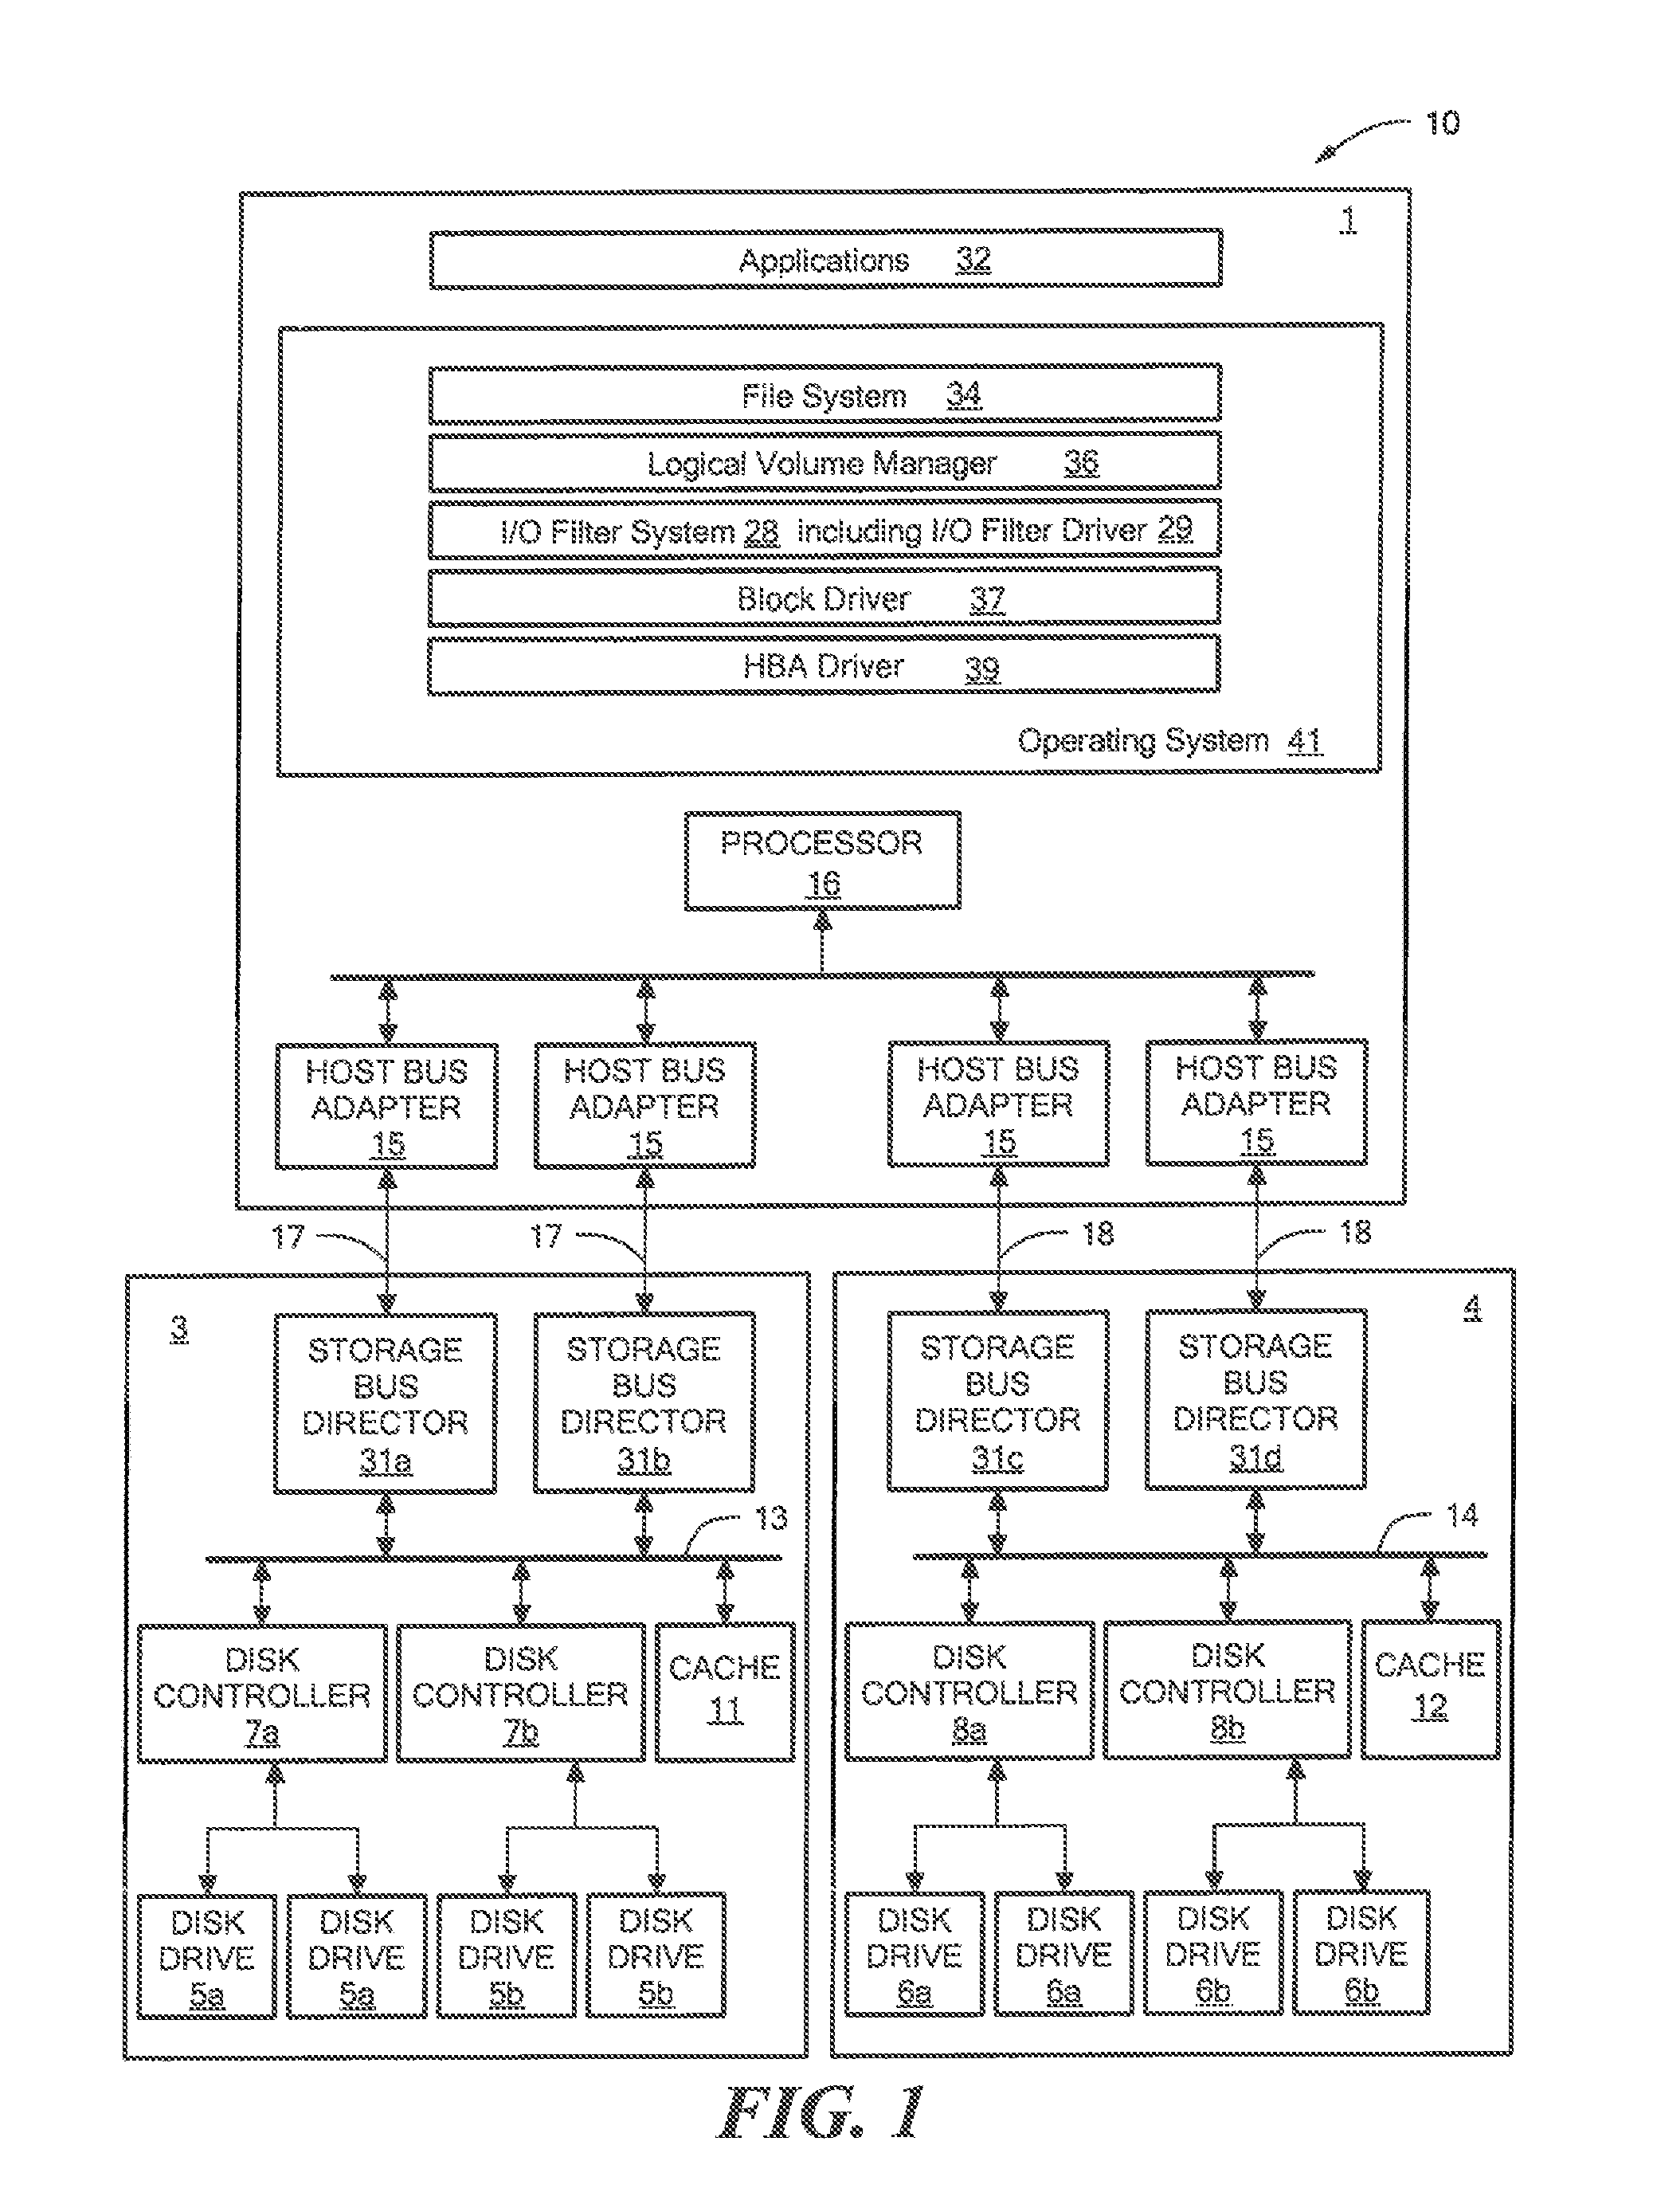 Systems and methods for accessing storage or network based replicas of encryped volumes with no additional key management